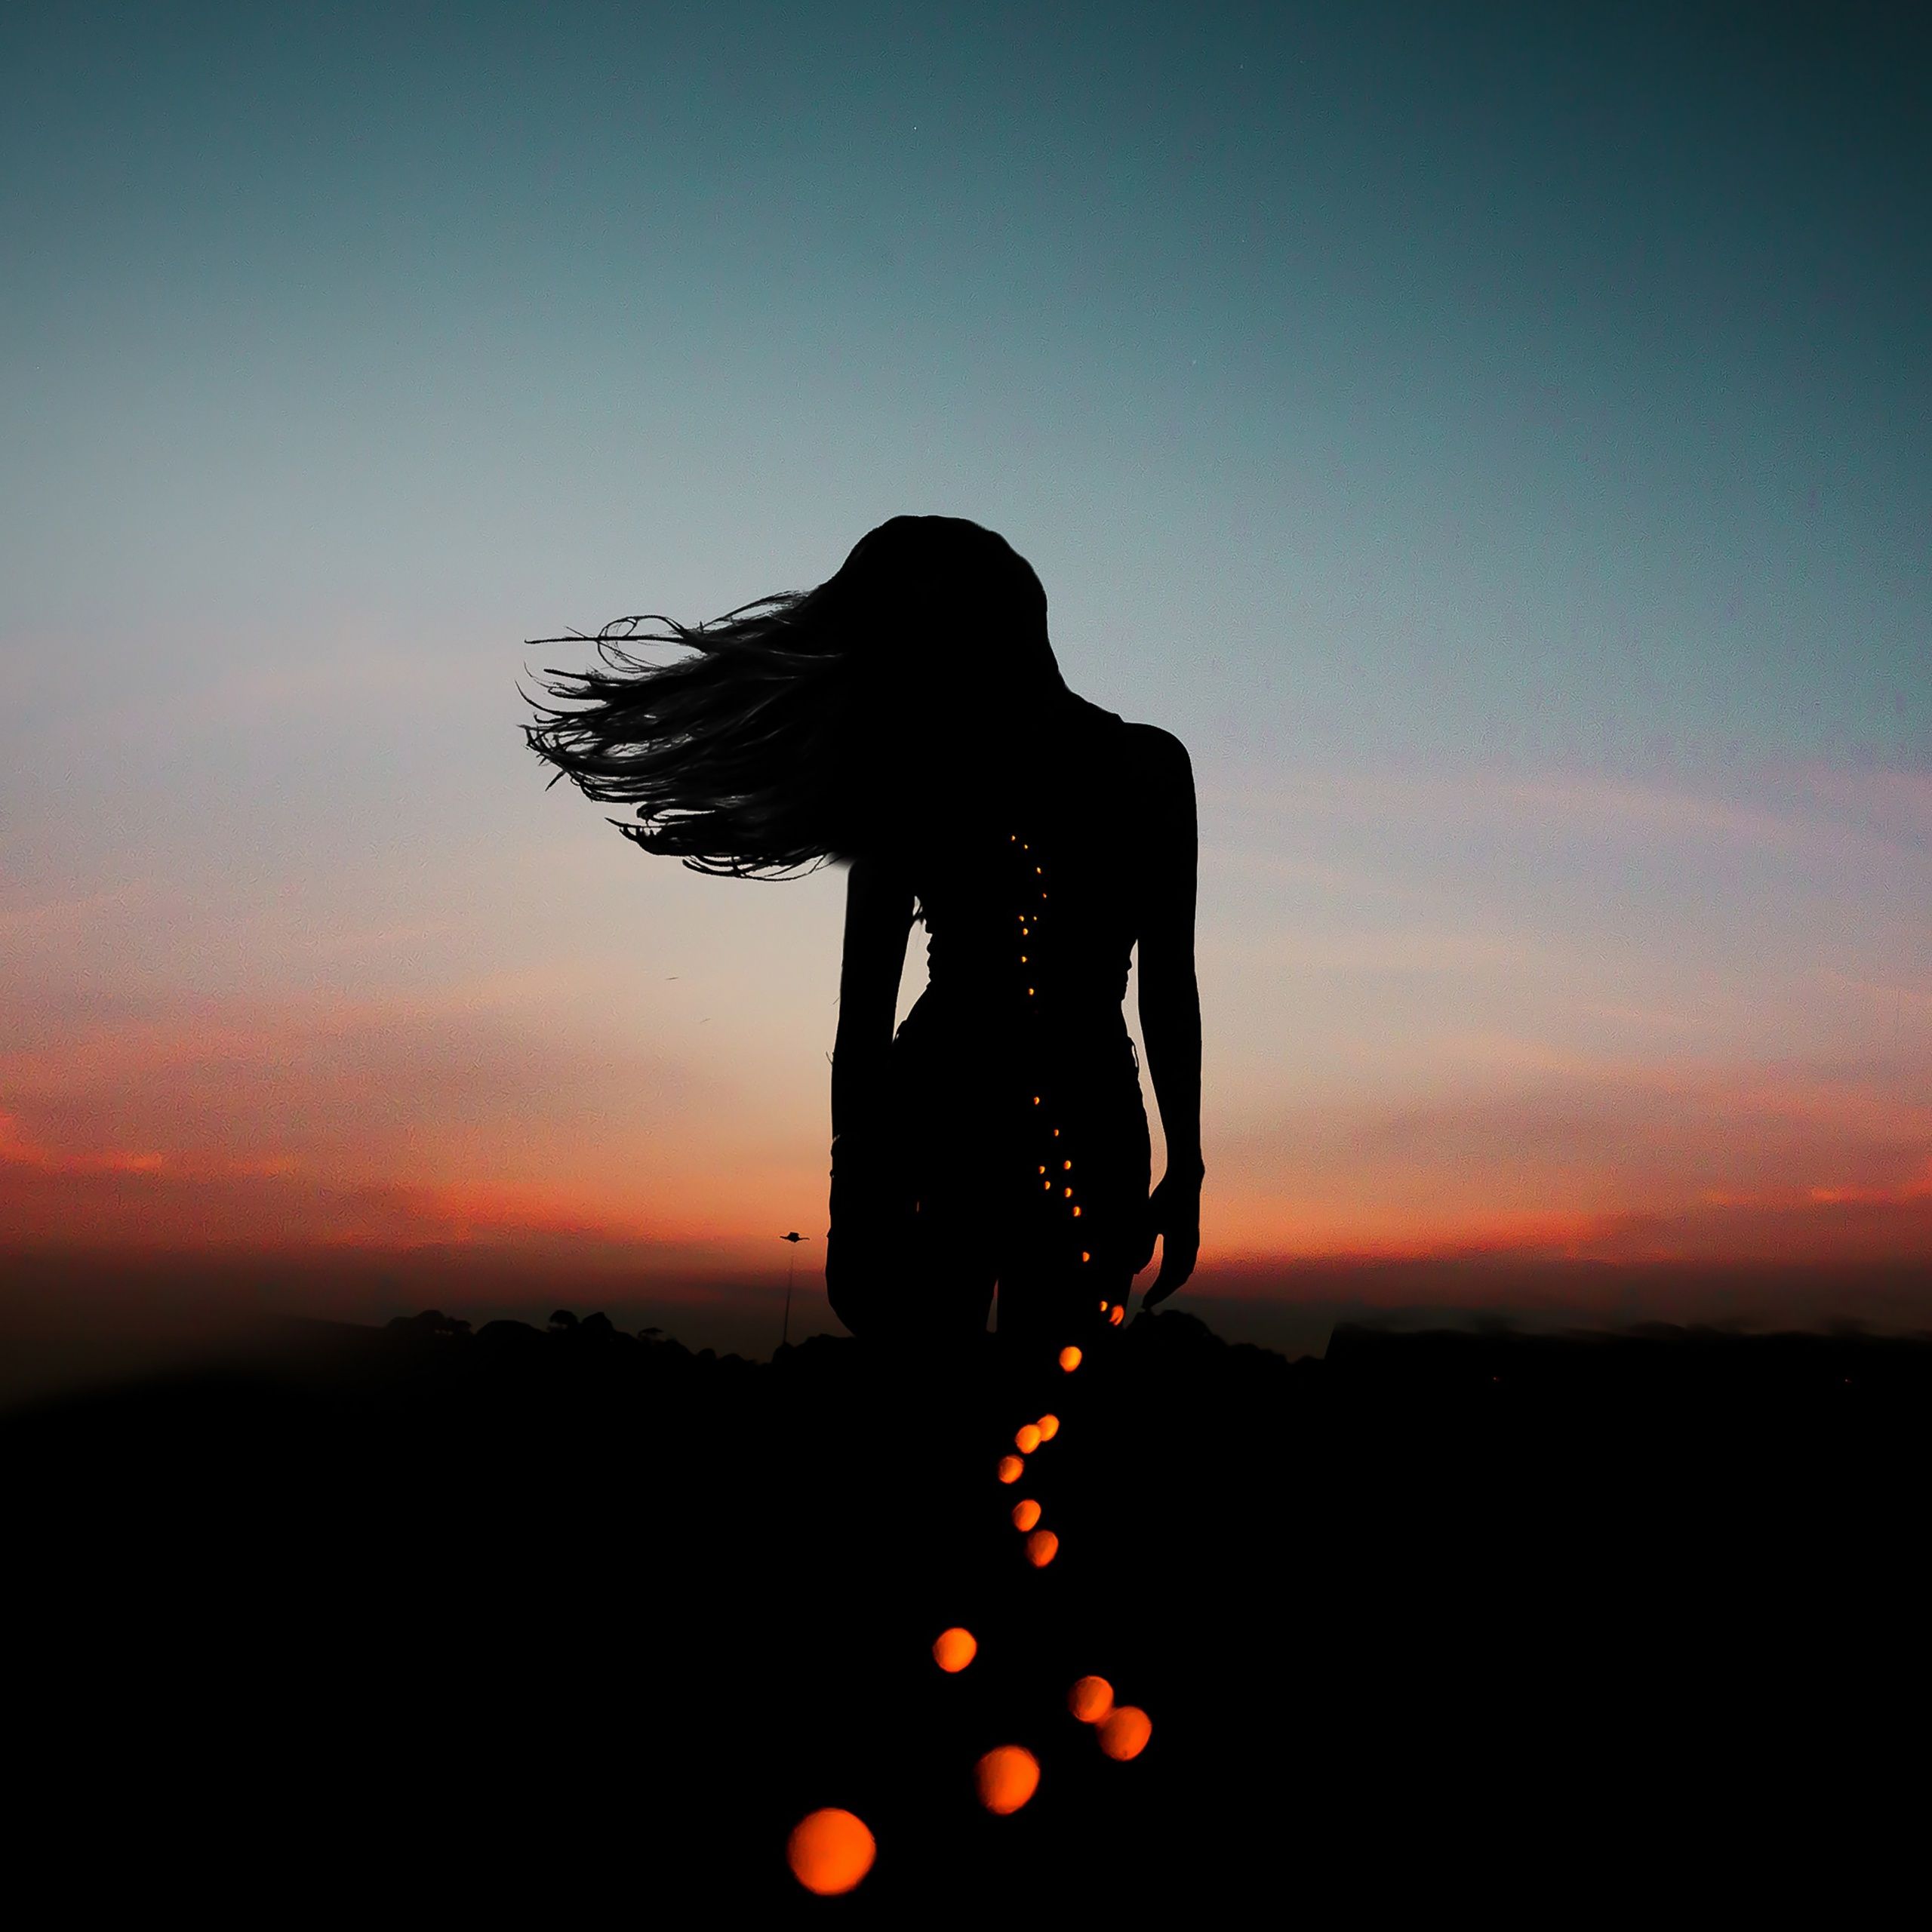 A woman with long hair stands in front of a sunset. - Sky